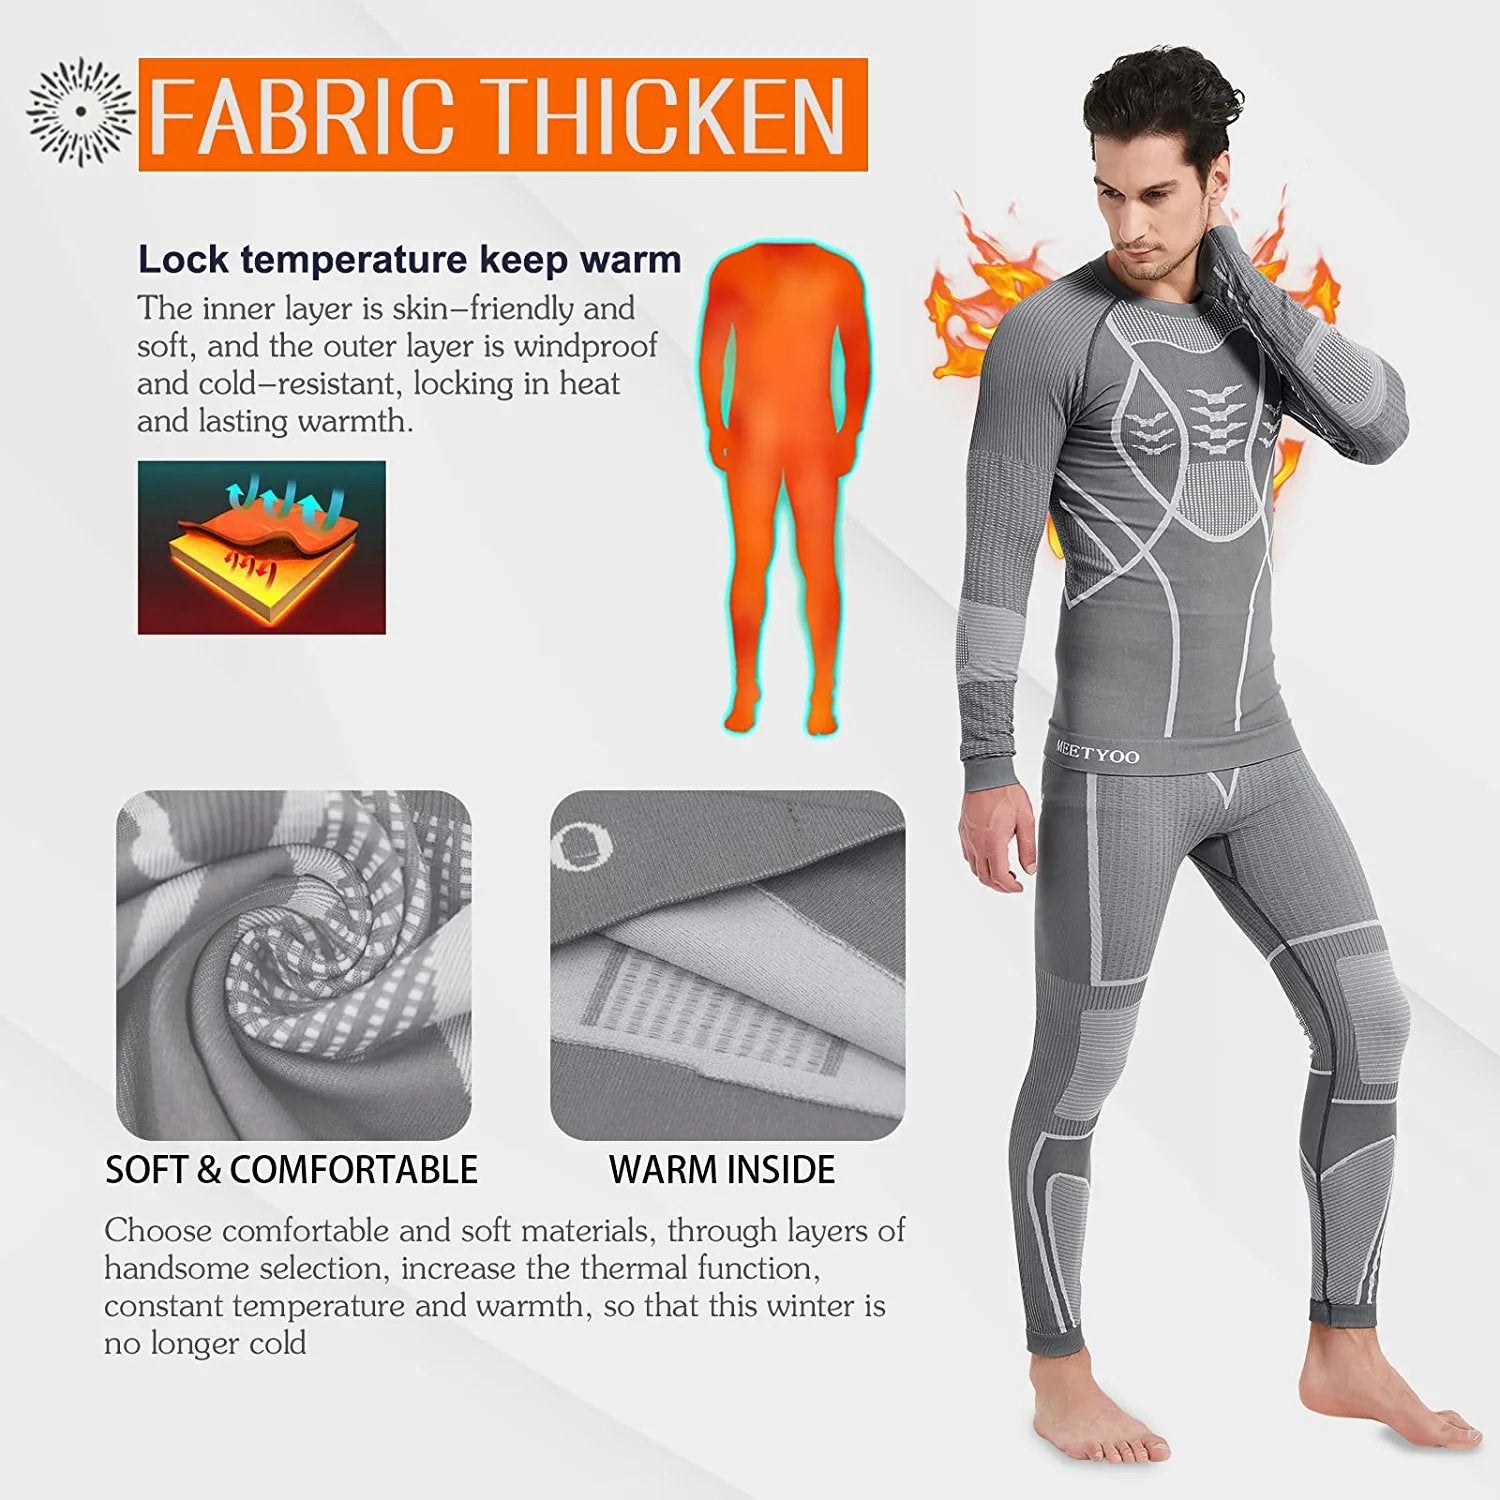 HEROBIKER Long Johns Thermal Underwear for Men Skiing Winter Warm Hunting  Gear Fleece Lined Base Layer Set Top Bottom, Grey, 3XL price in Egypt,  Egypt